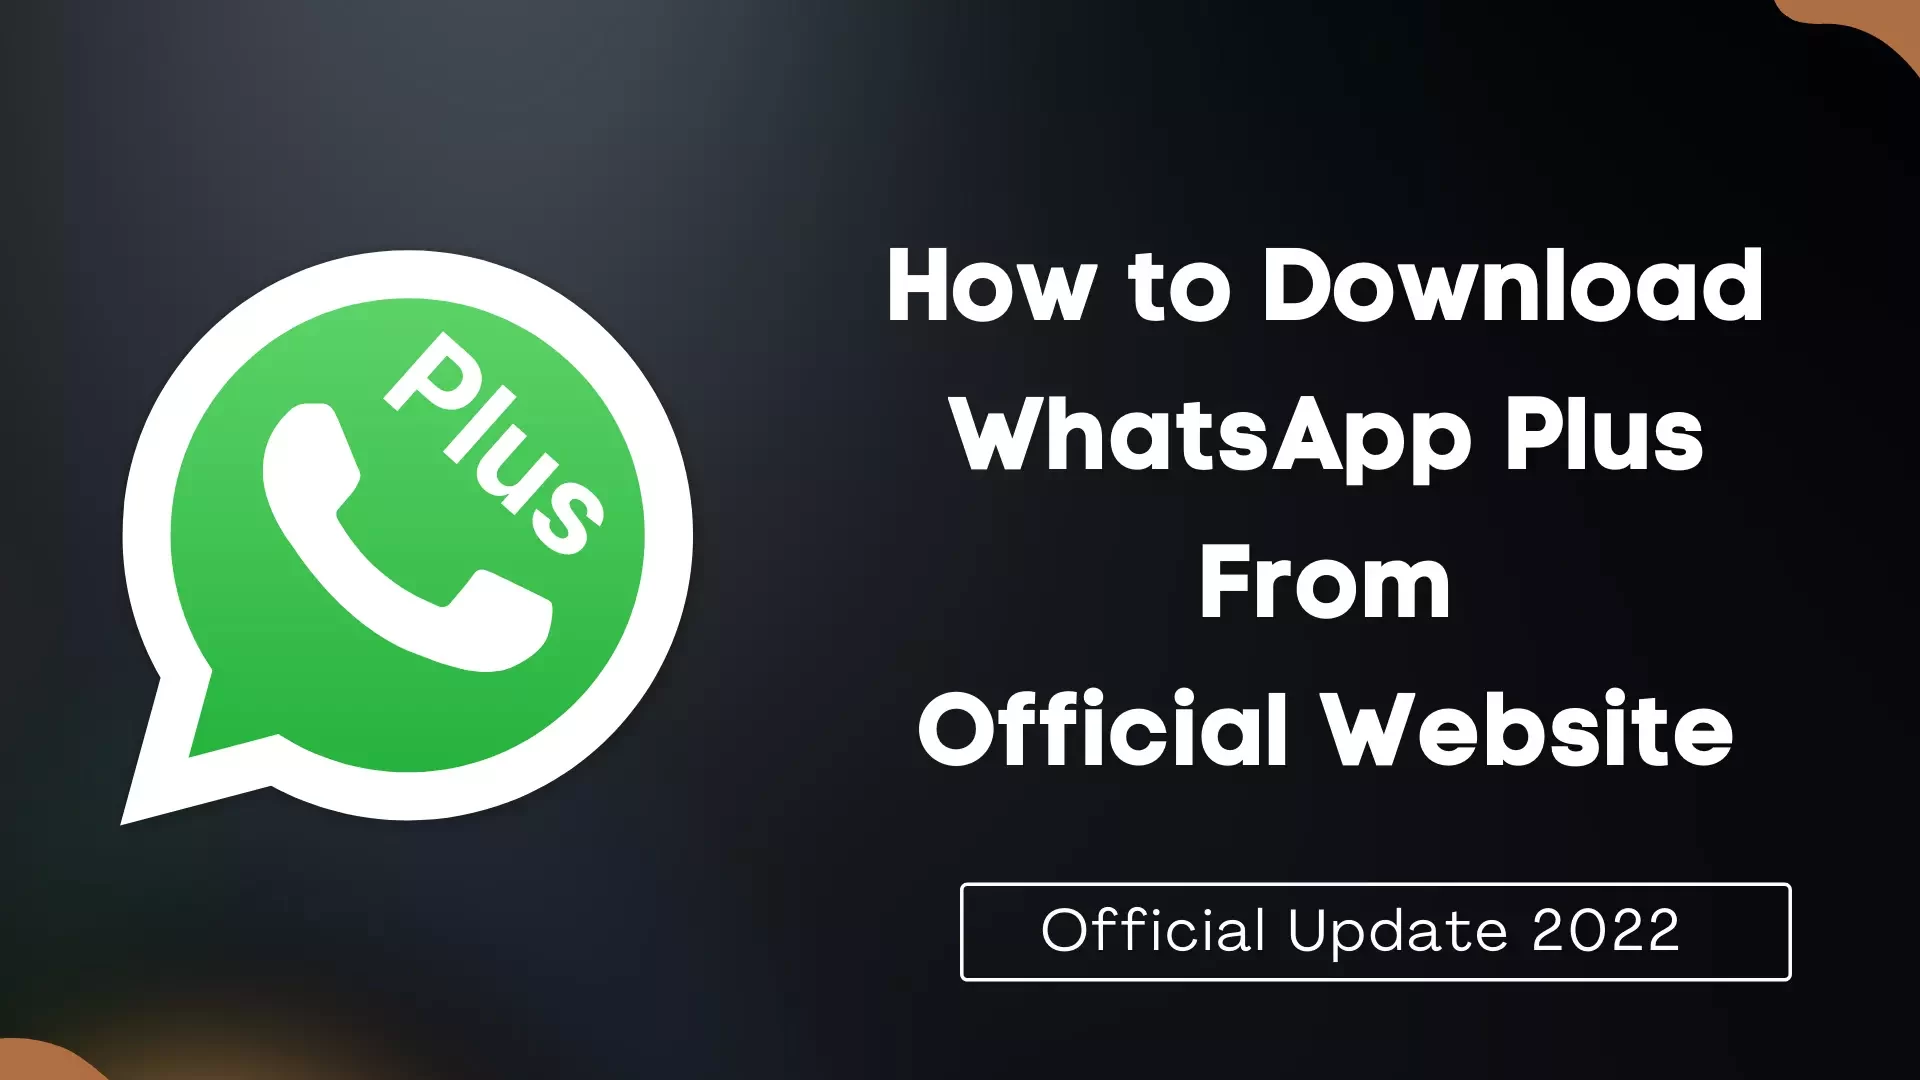 How to Download WhatsApp Plus from Official Website